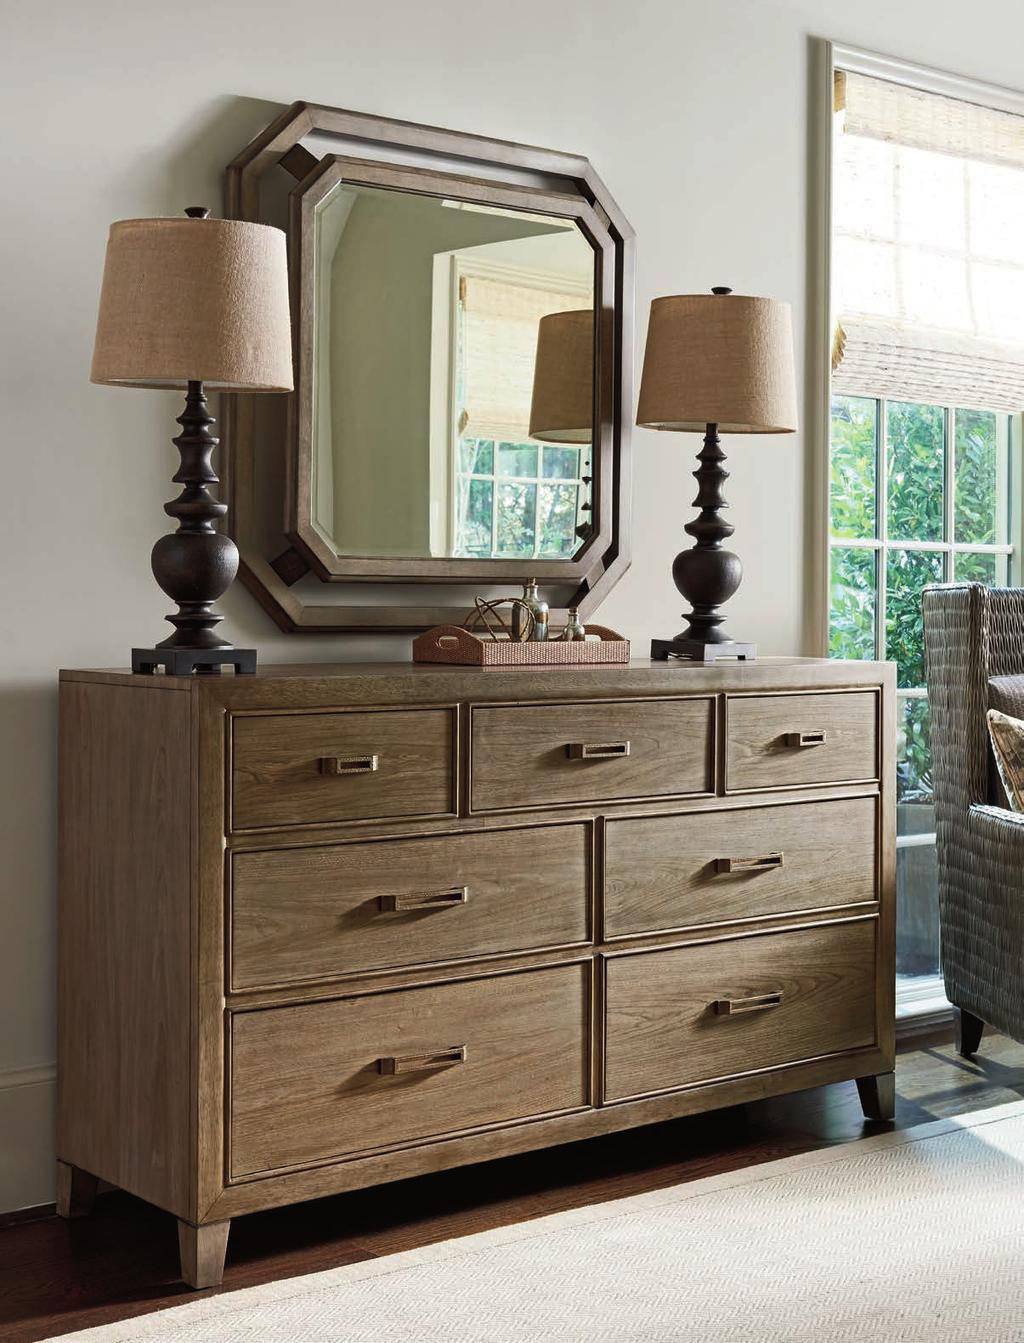 The clean contemporary lines of the 7-drawer Lockeport dresser and 5-drawer Brookdale chest feature generous storage with custom